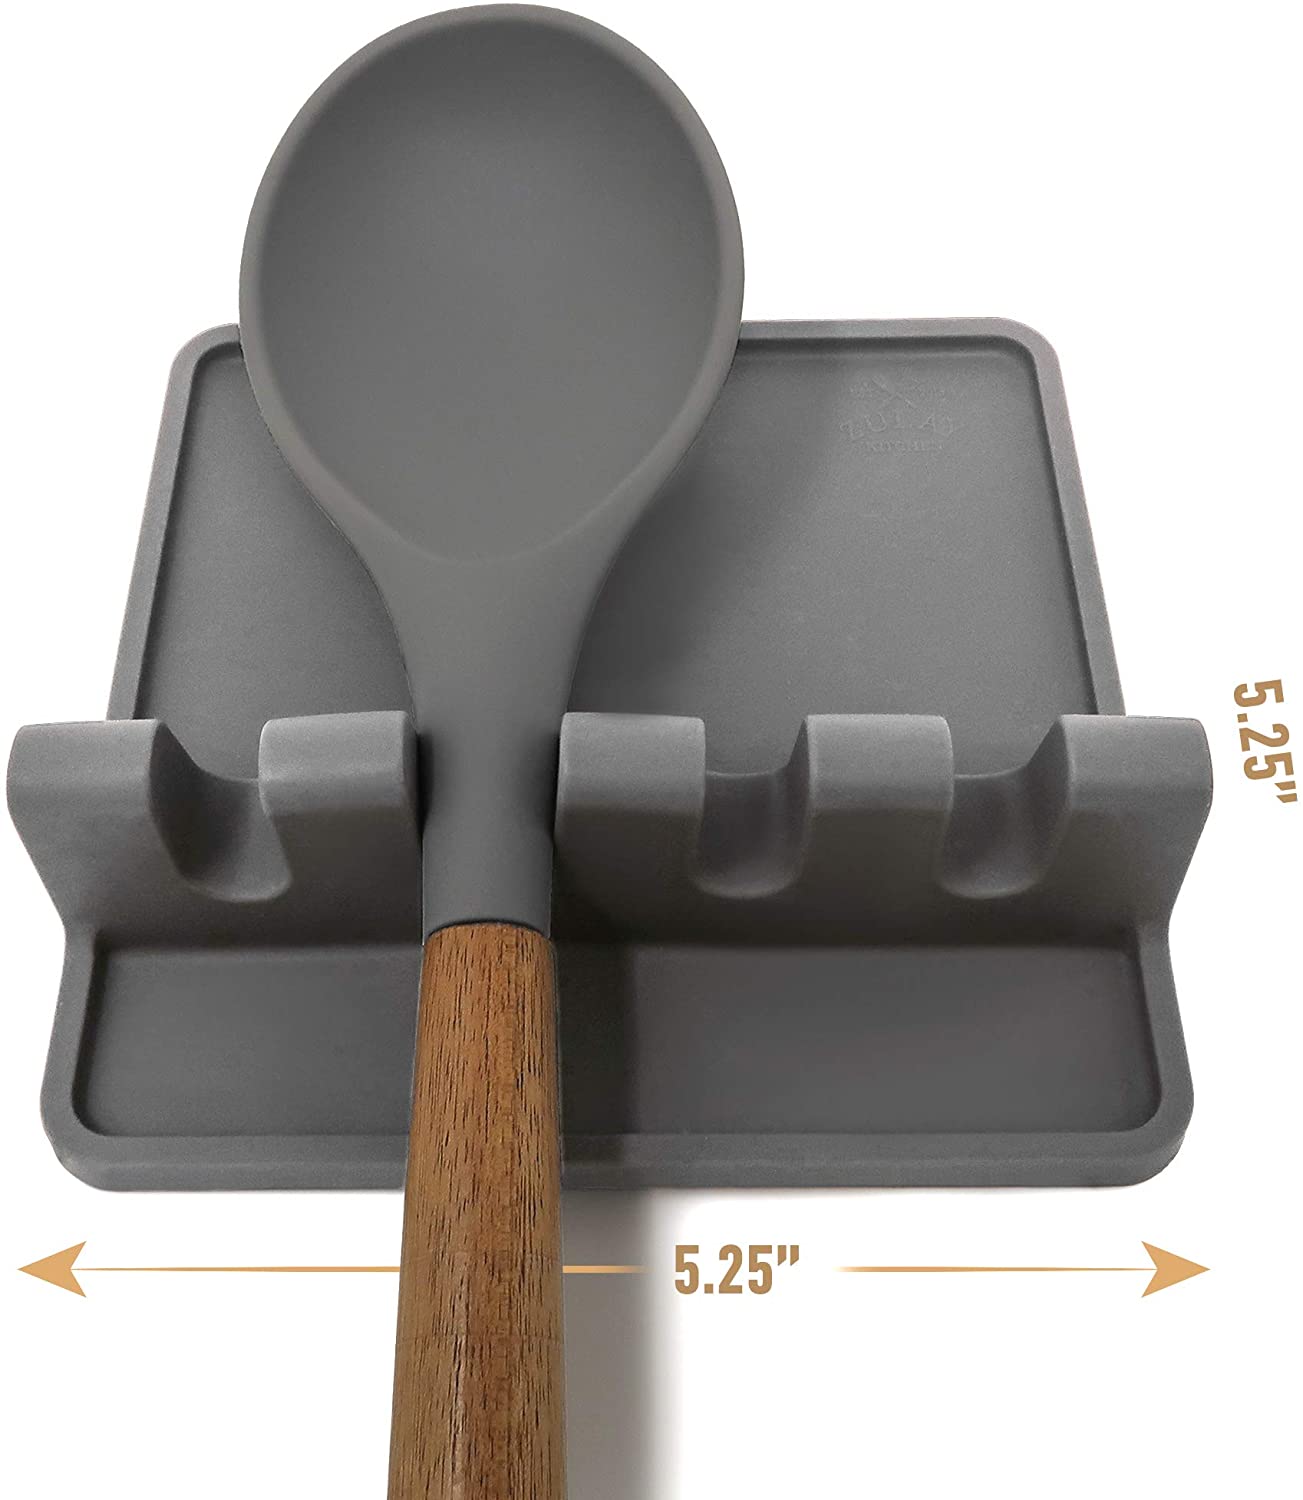 Zulay Gray Silicone Utensil Rest with Drip Pad - Heat-Resistant, BPA-Free Spoon Rest & Holder for Stove Top, Kitchen Utensil Holder for Spoons, Ladles, Tongs & More 5